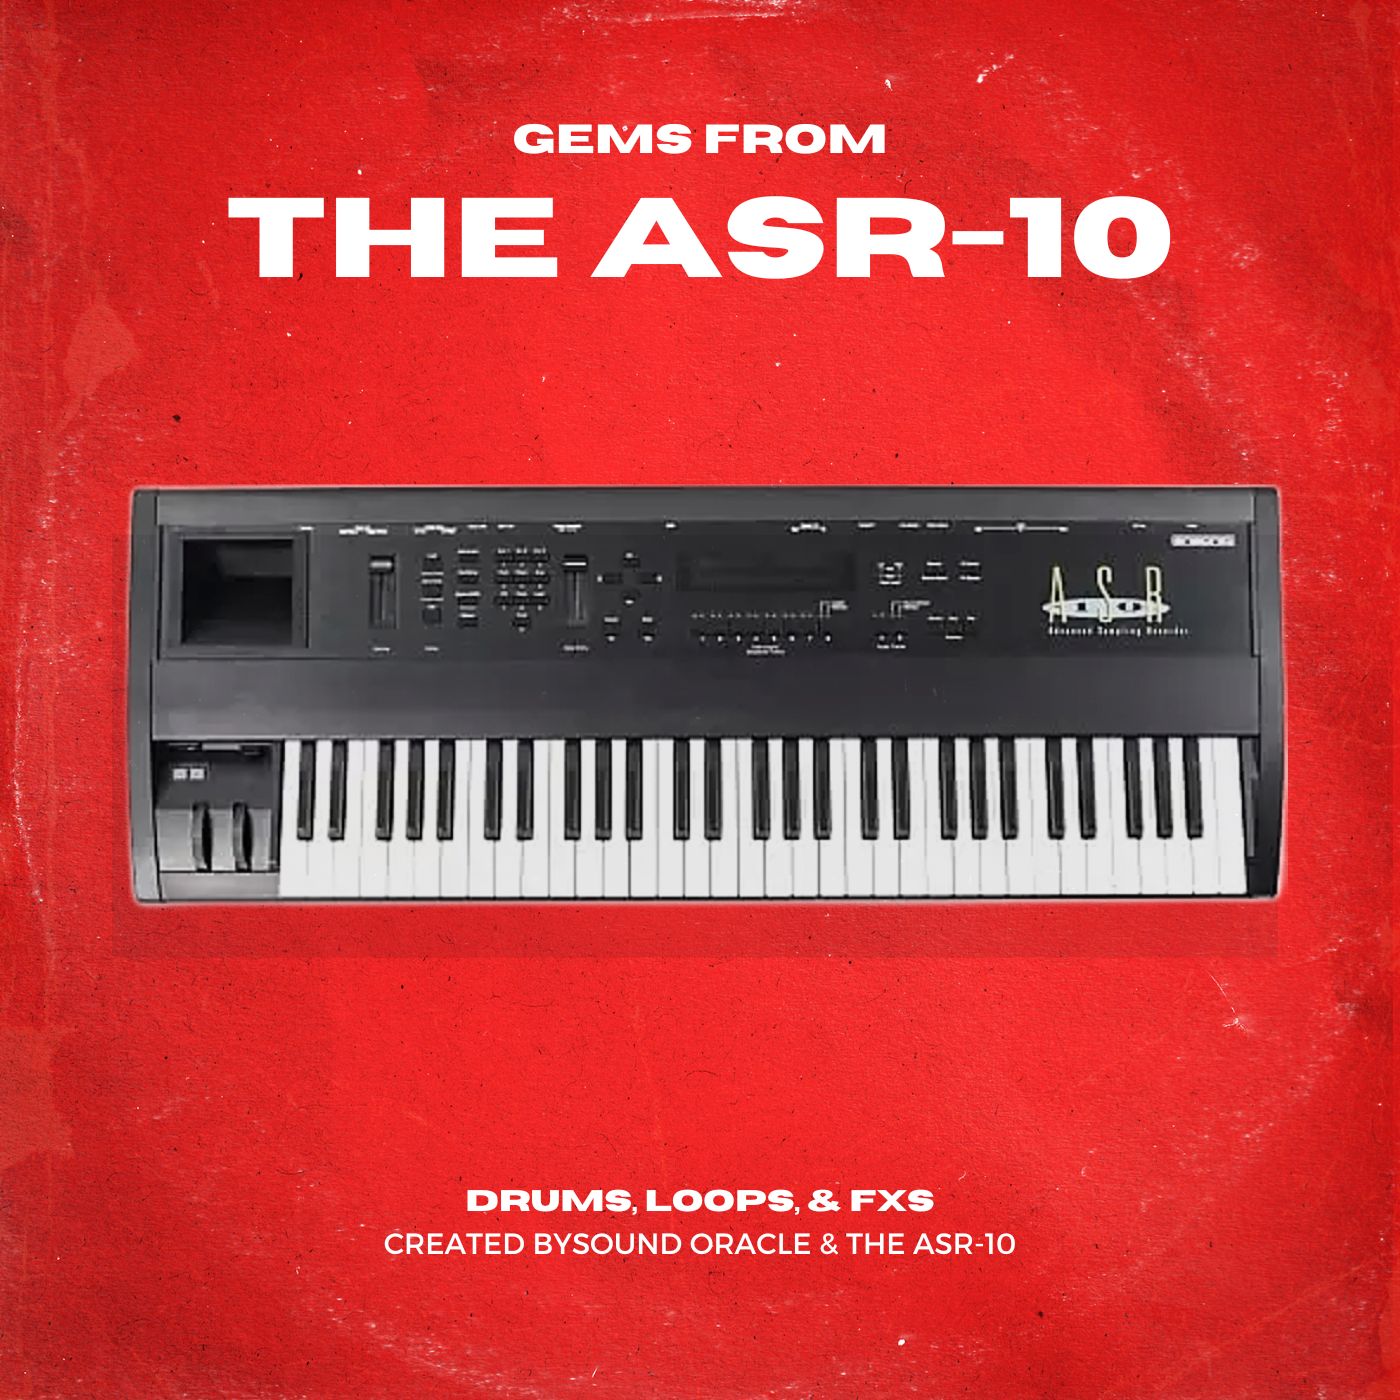 Vintage red album cover with a black ASR-10 sampling  keyboard on it. The words on the image say Gems from the ASR-10 sample pack